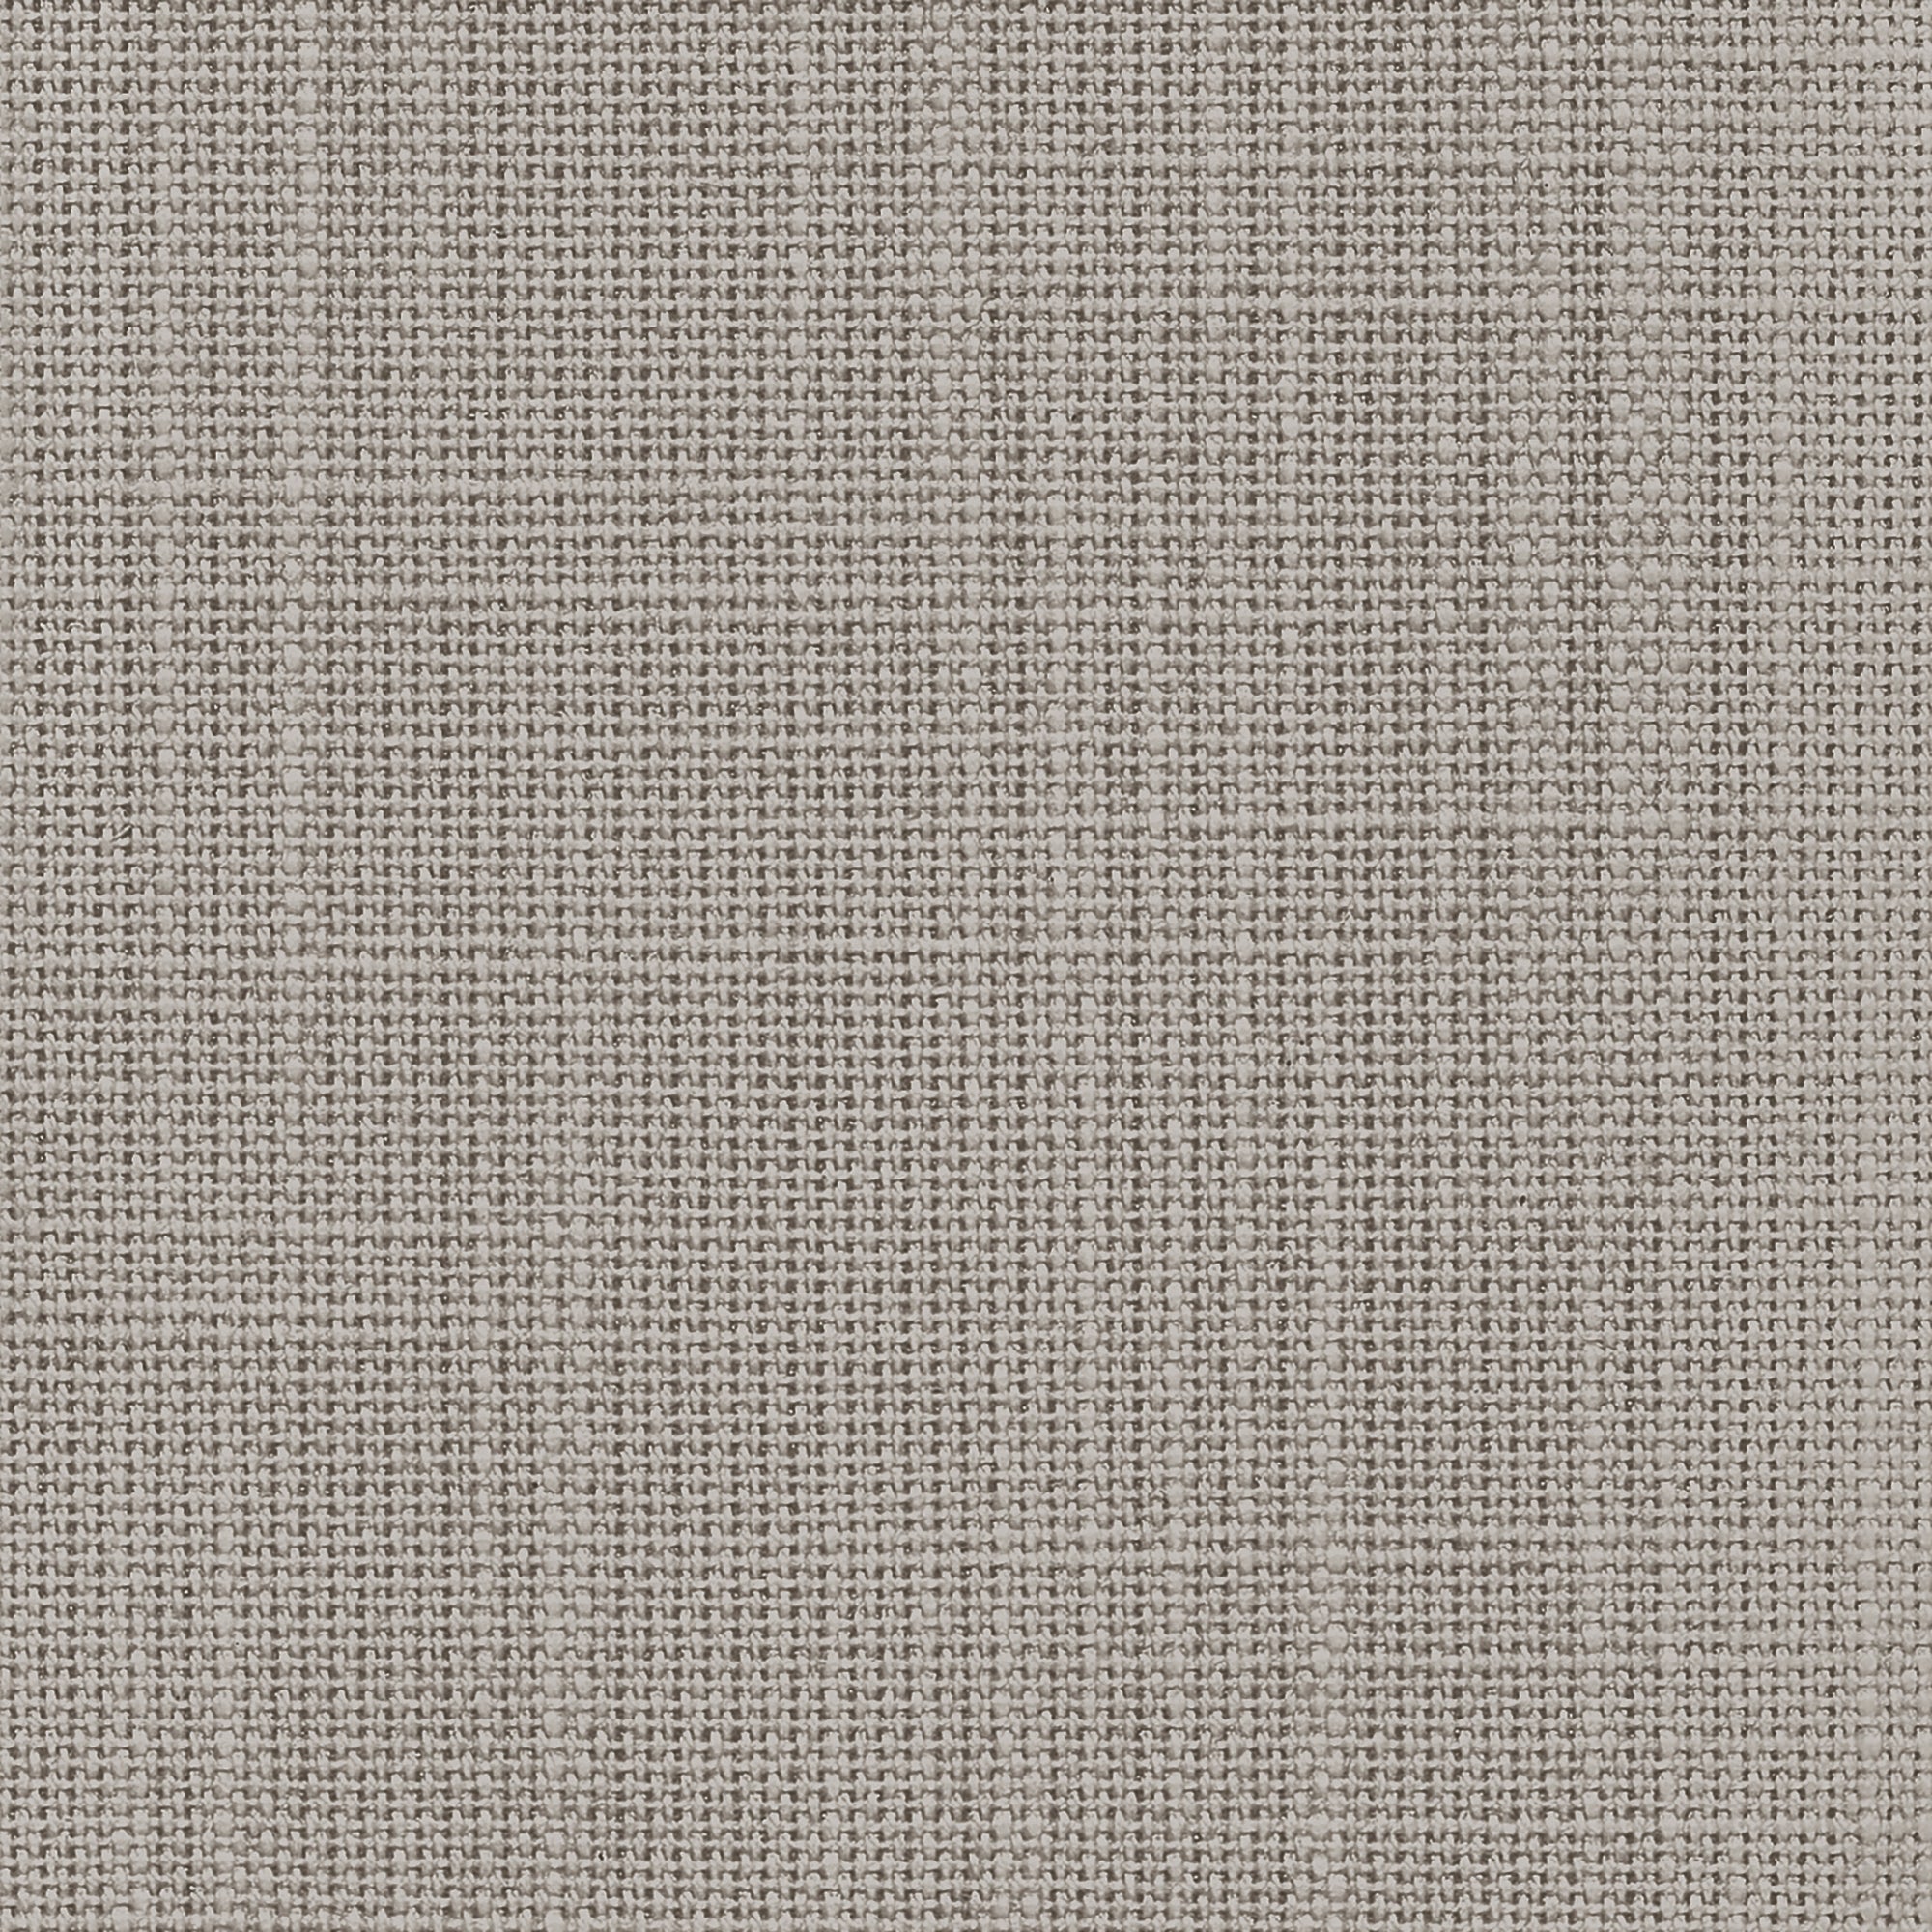 Bexley Blackout Made to Measure Vertical Blind Fabric Sample Bexley Truffle